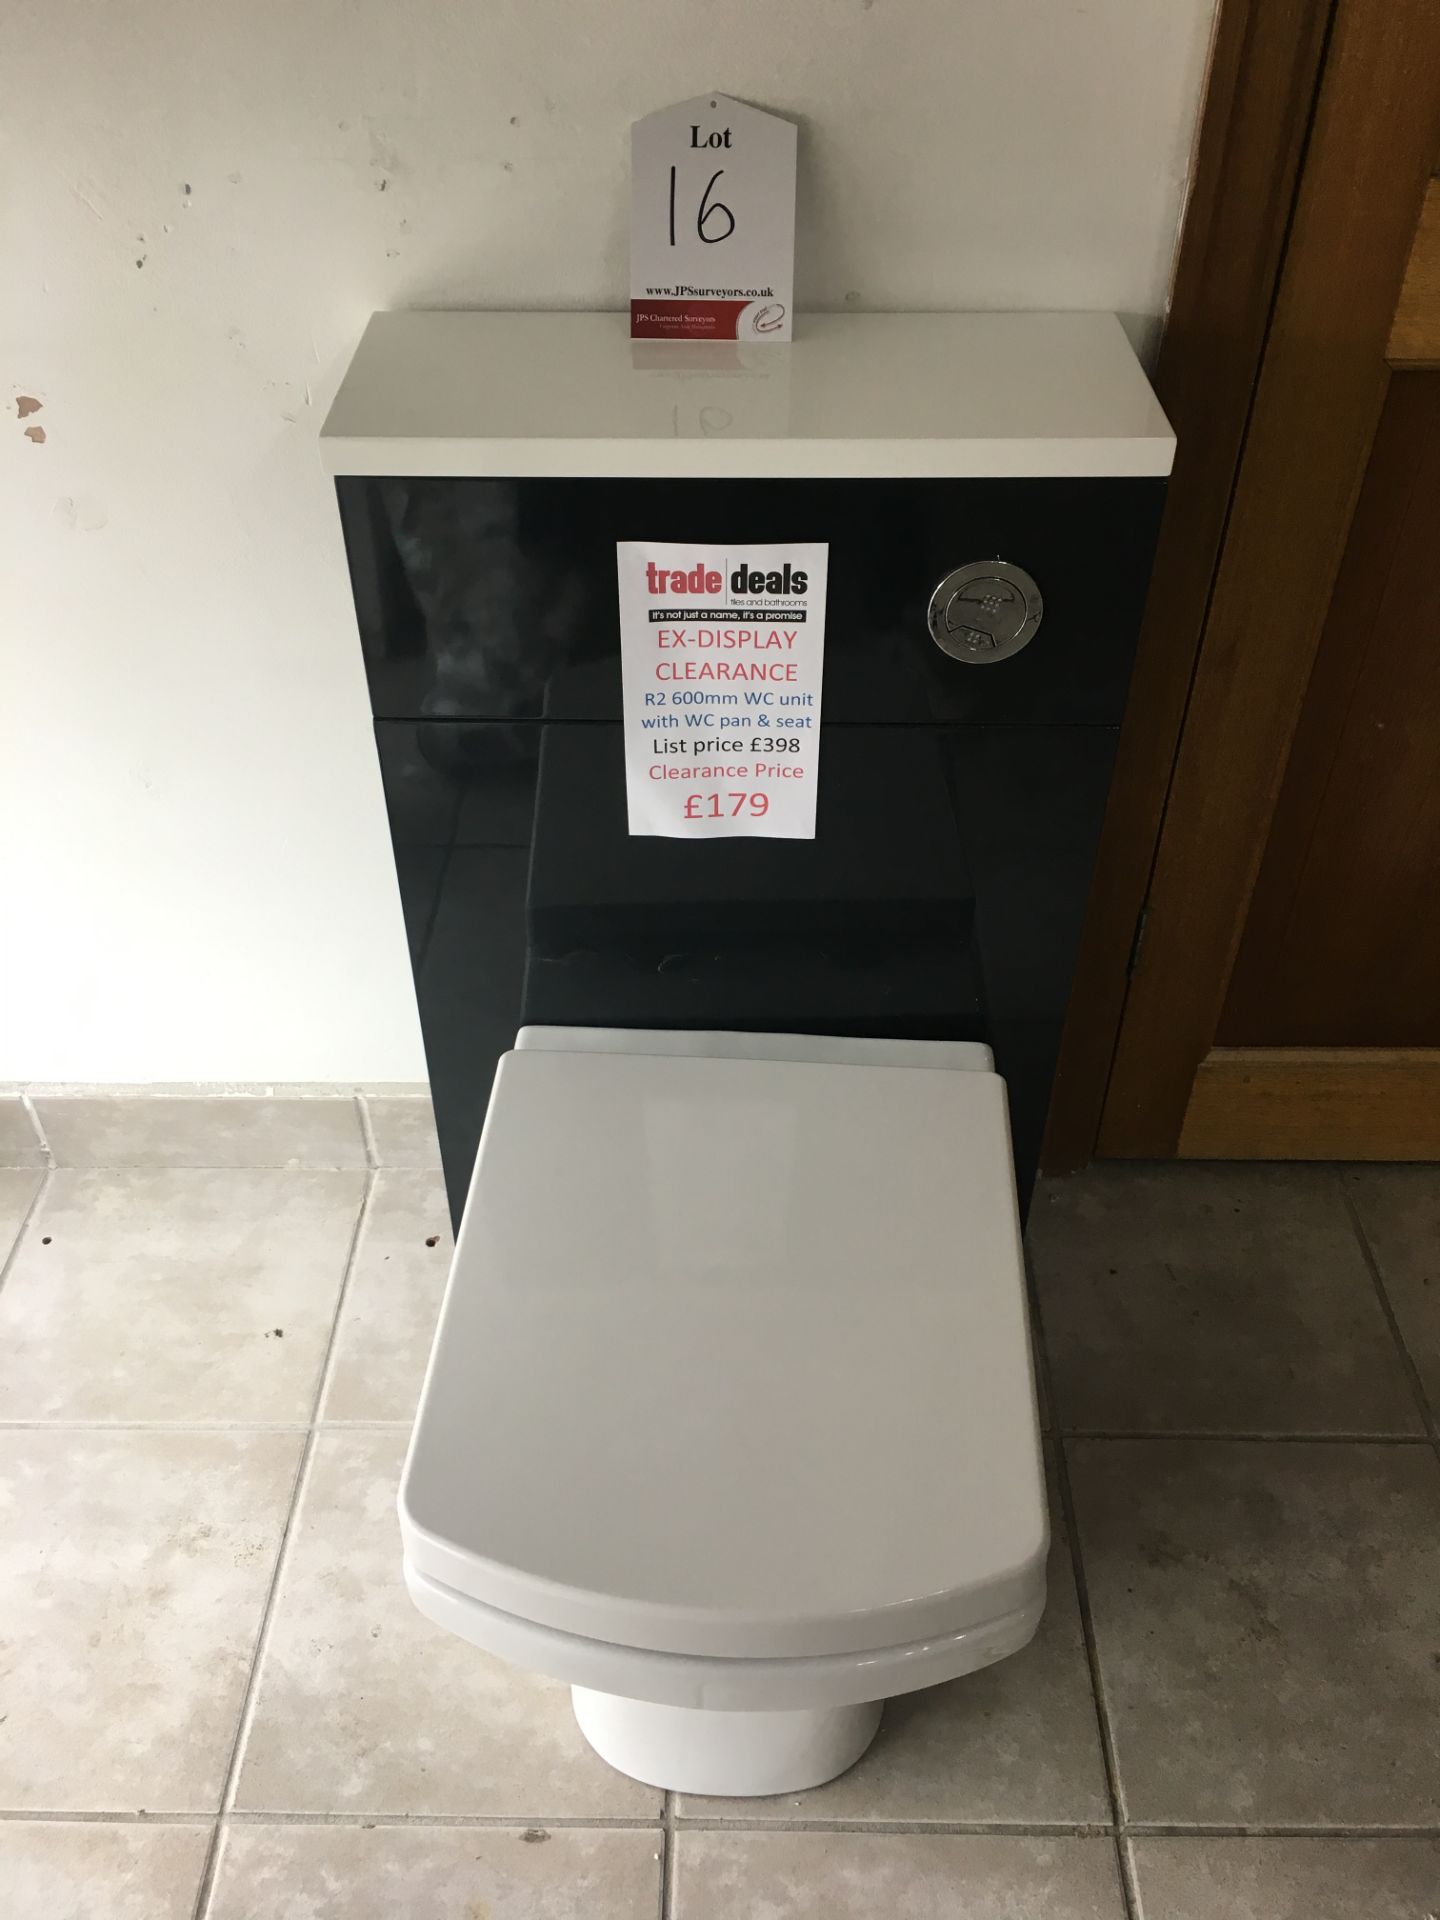 R2600mm WC unit w/ WC pan & seat (£398 reduced to £179) w/ limit cabinet with double sided mirror do